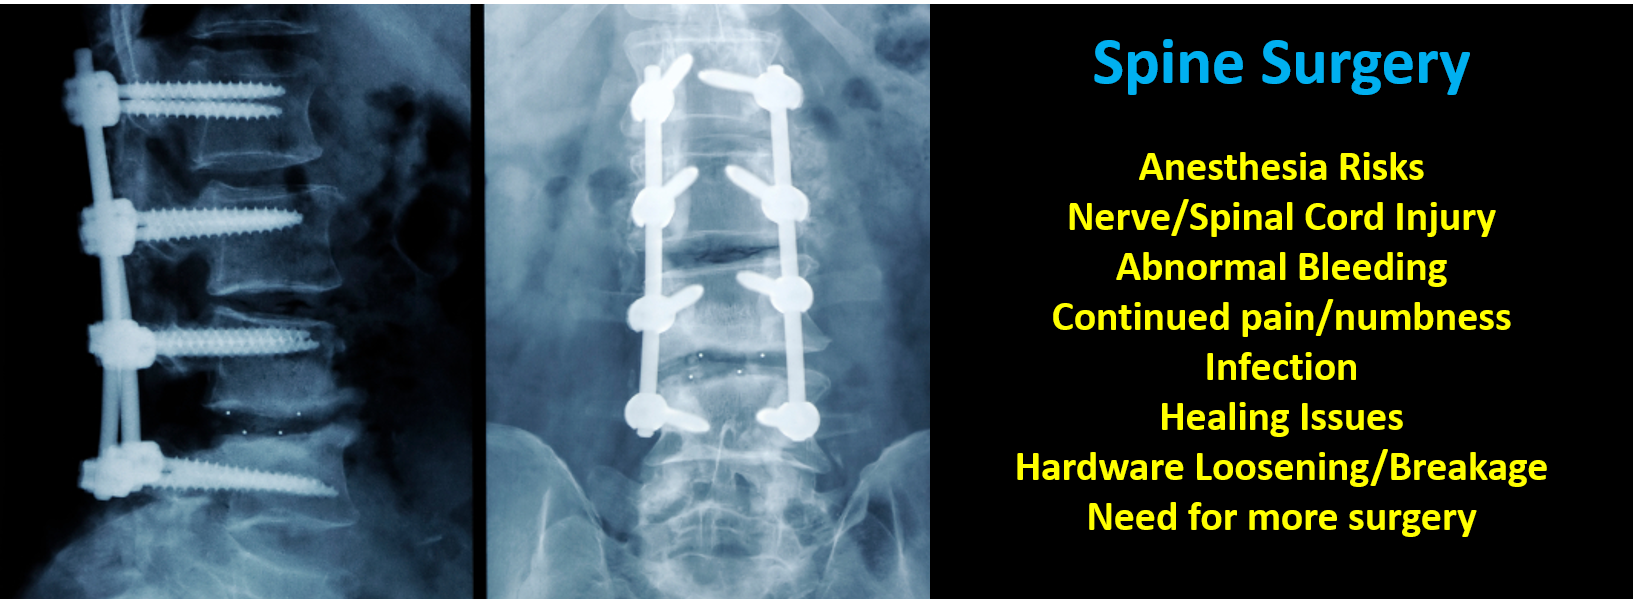 X-ray of spine surgery